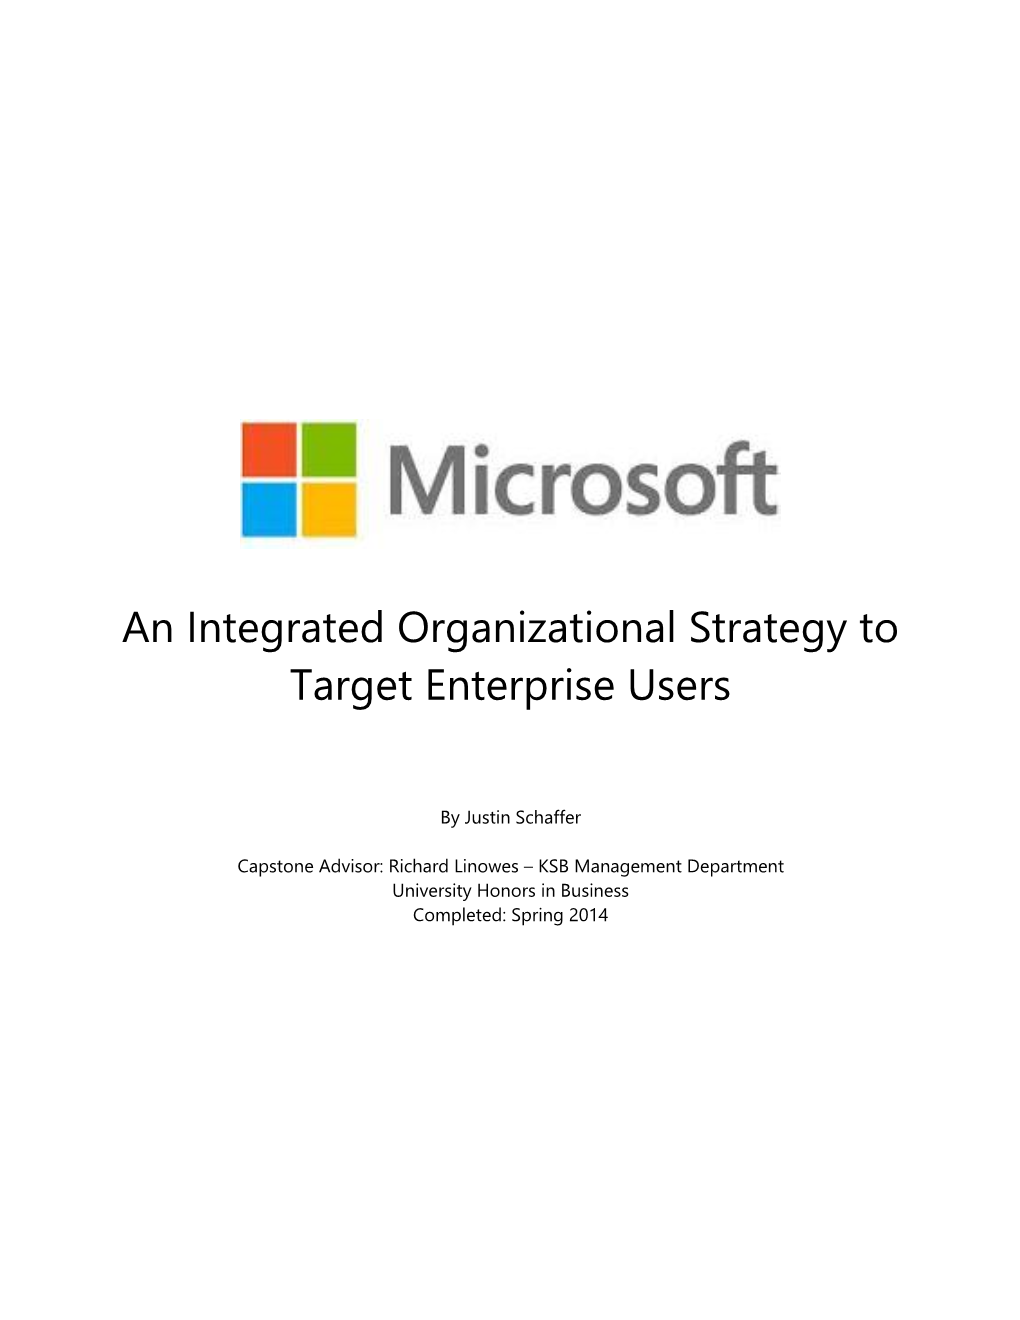 An Integrated Organizational Strategy to Target Enterprise Users